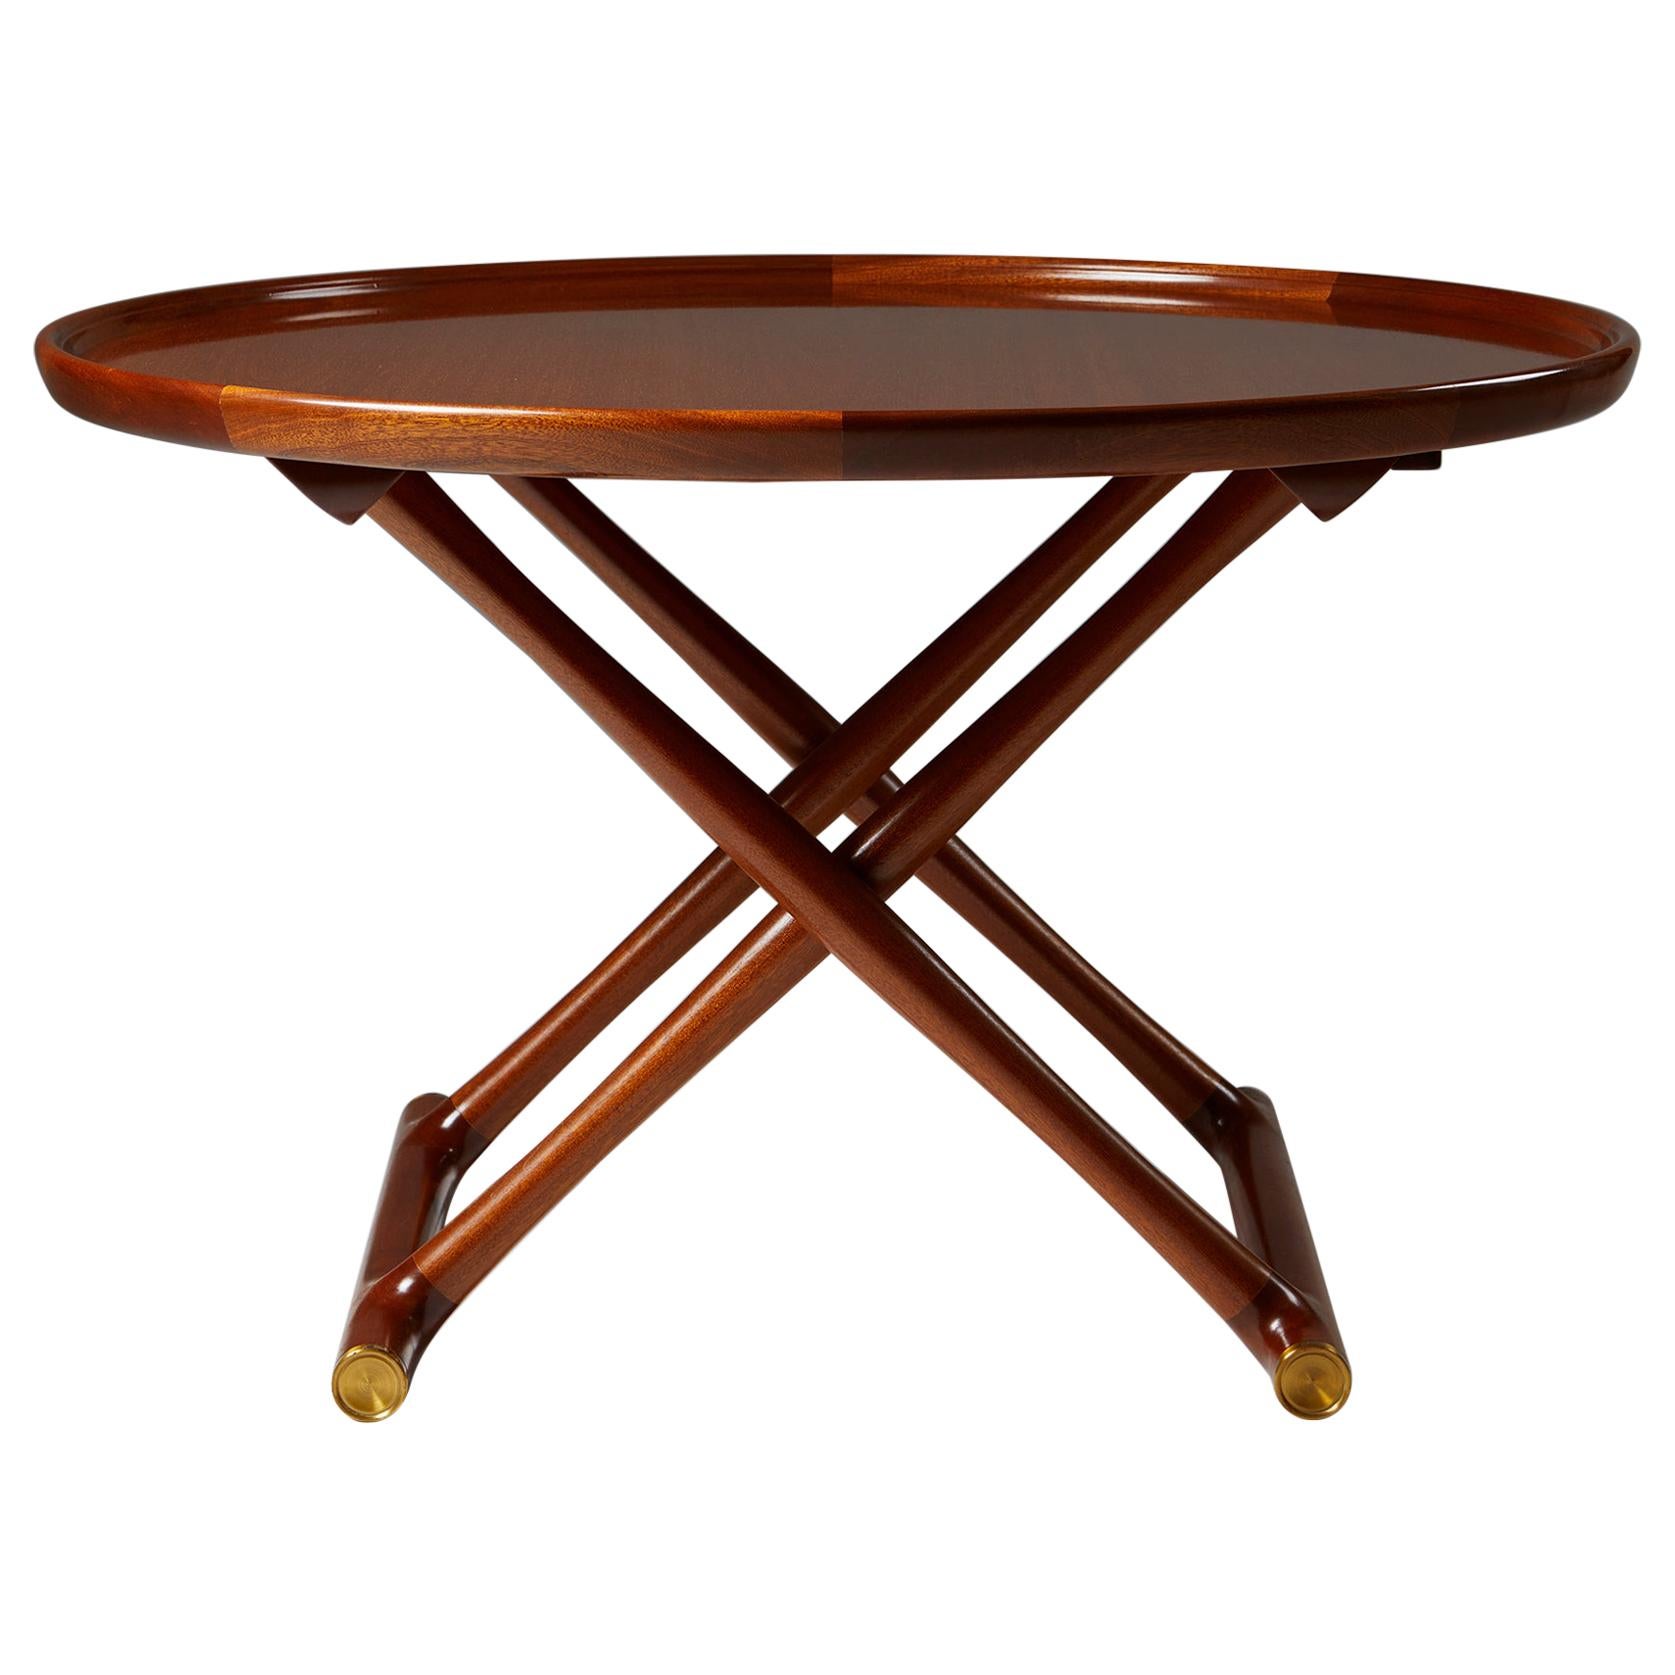 Occasional Table “The Egyptian table”, Designed by Mogens Lassen